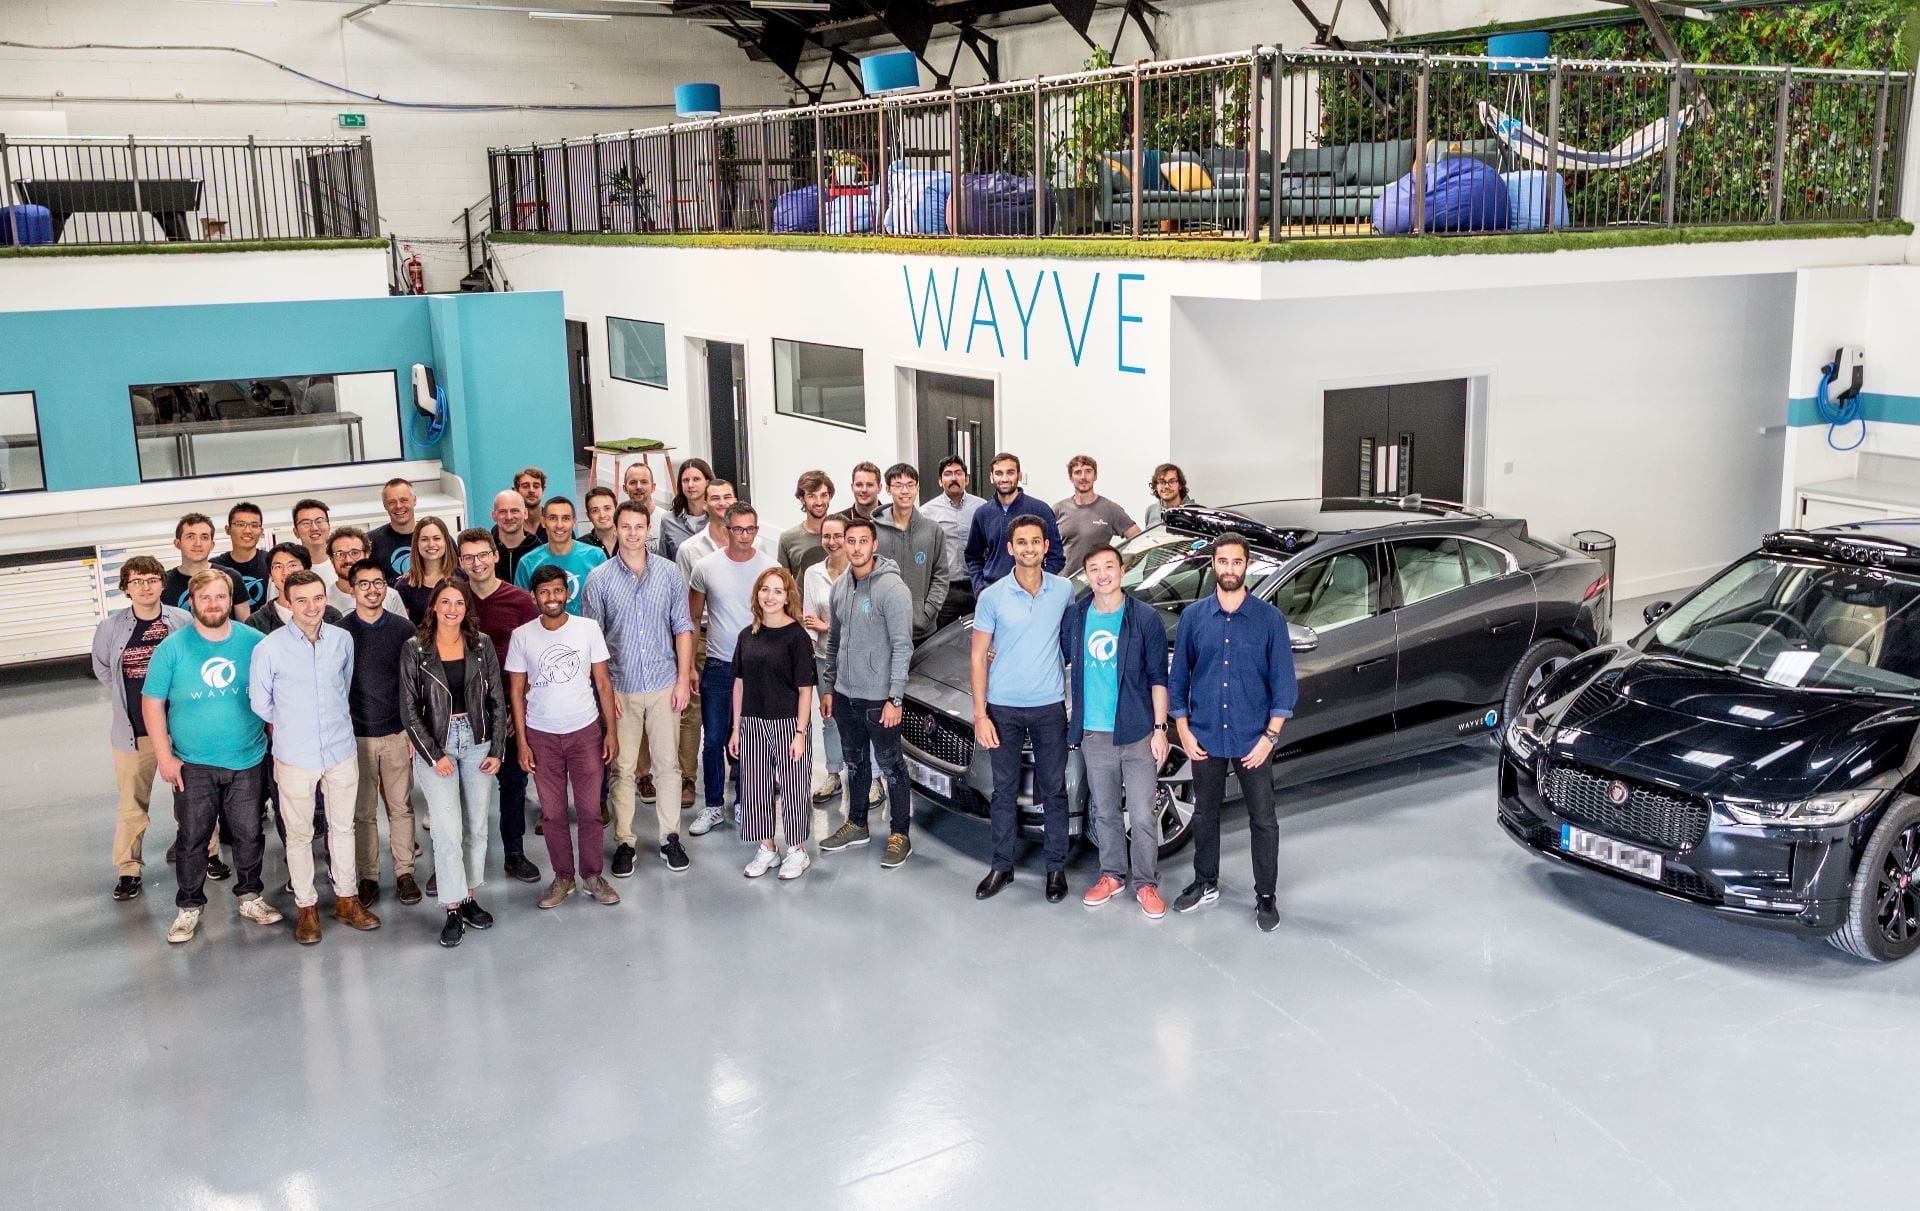 Wayve secures $1B from SoftBank, Microsoft, and NVIDIA to build AI for self-driving cars